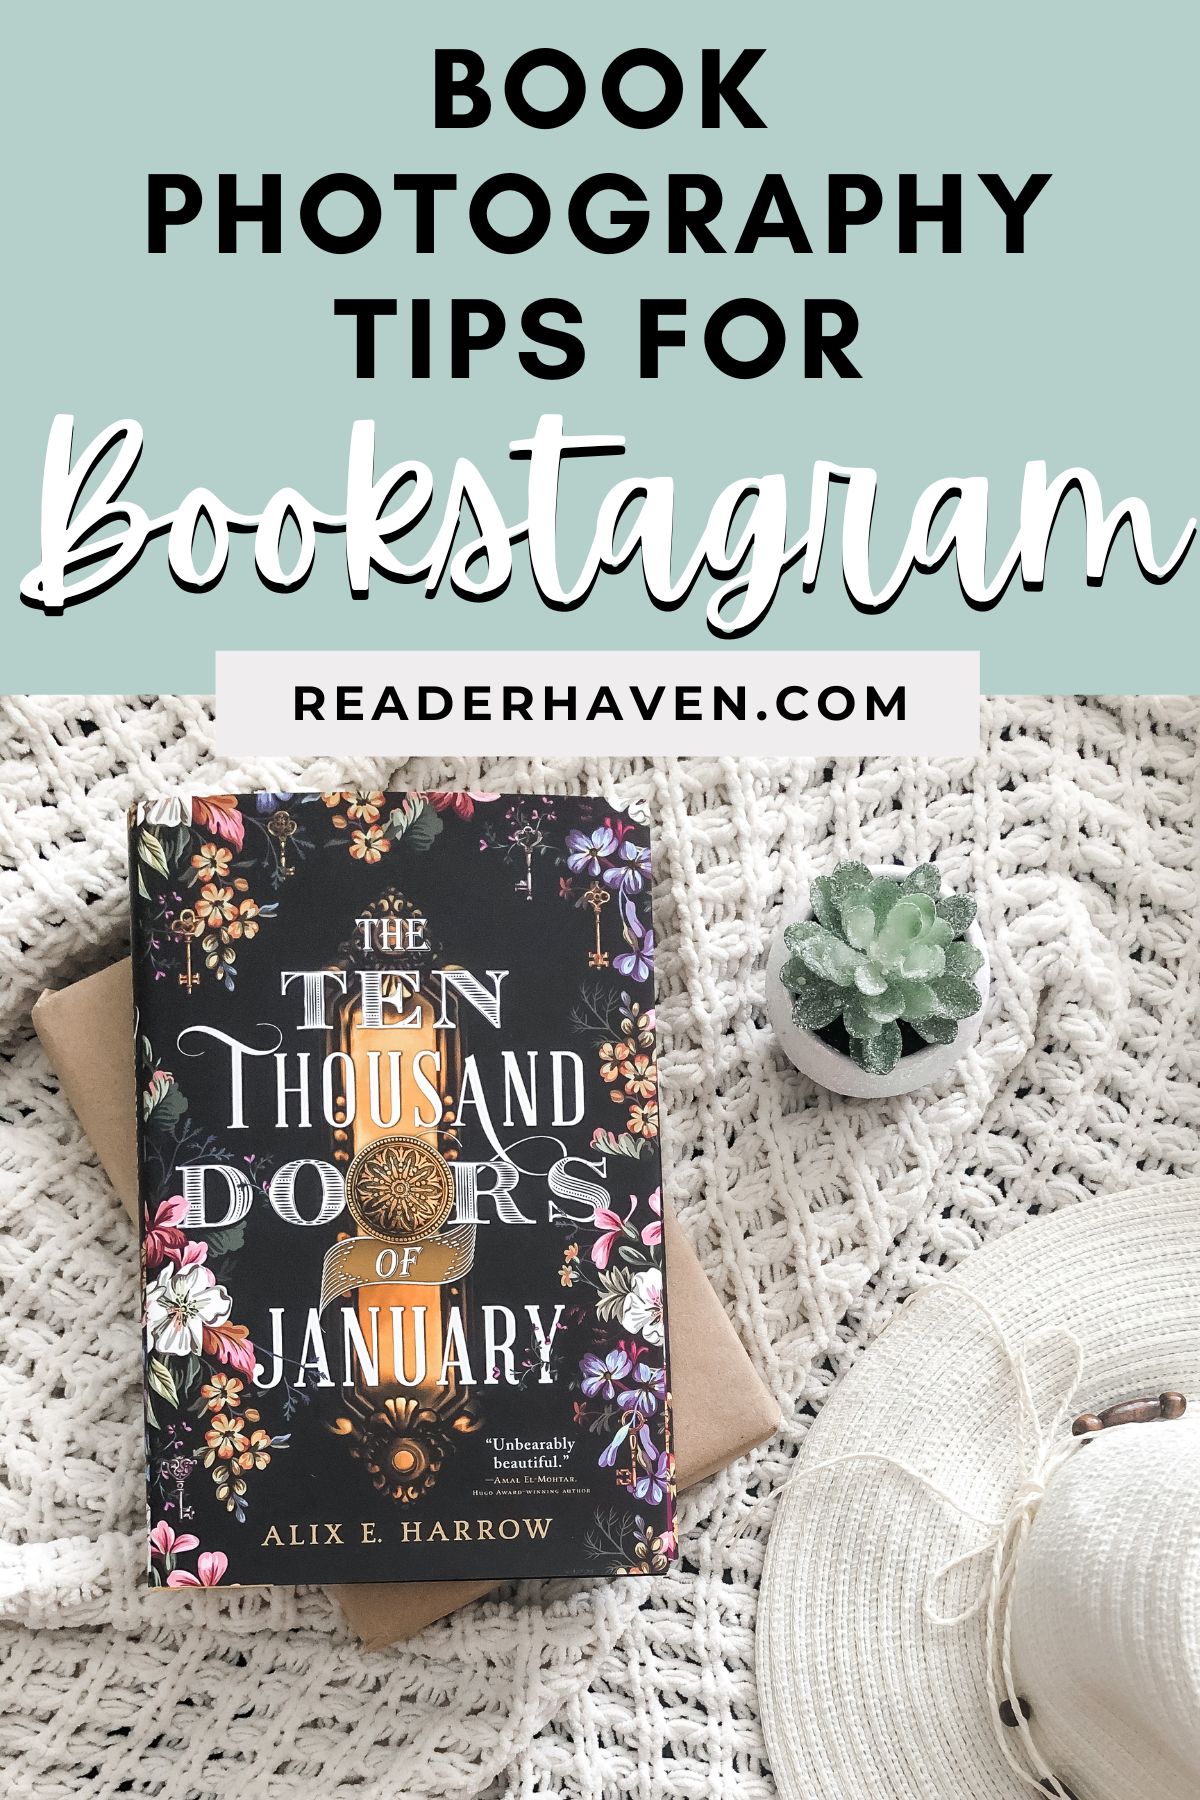 book photography tips for Bookstagram